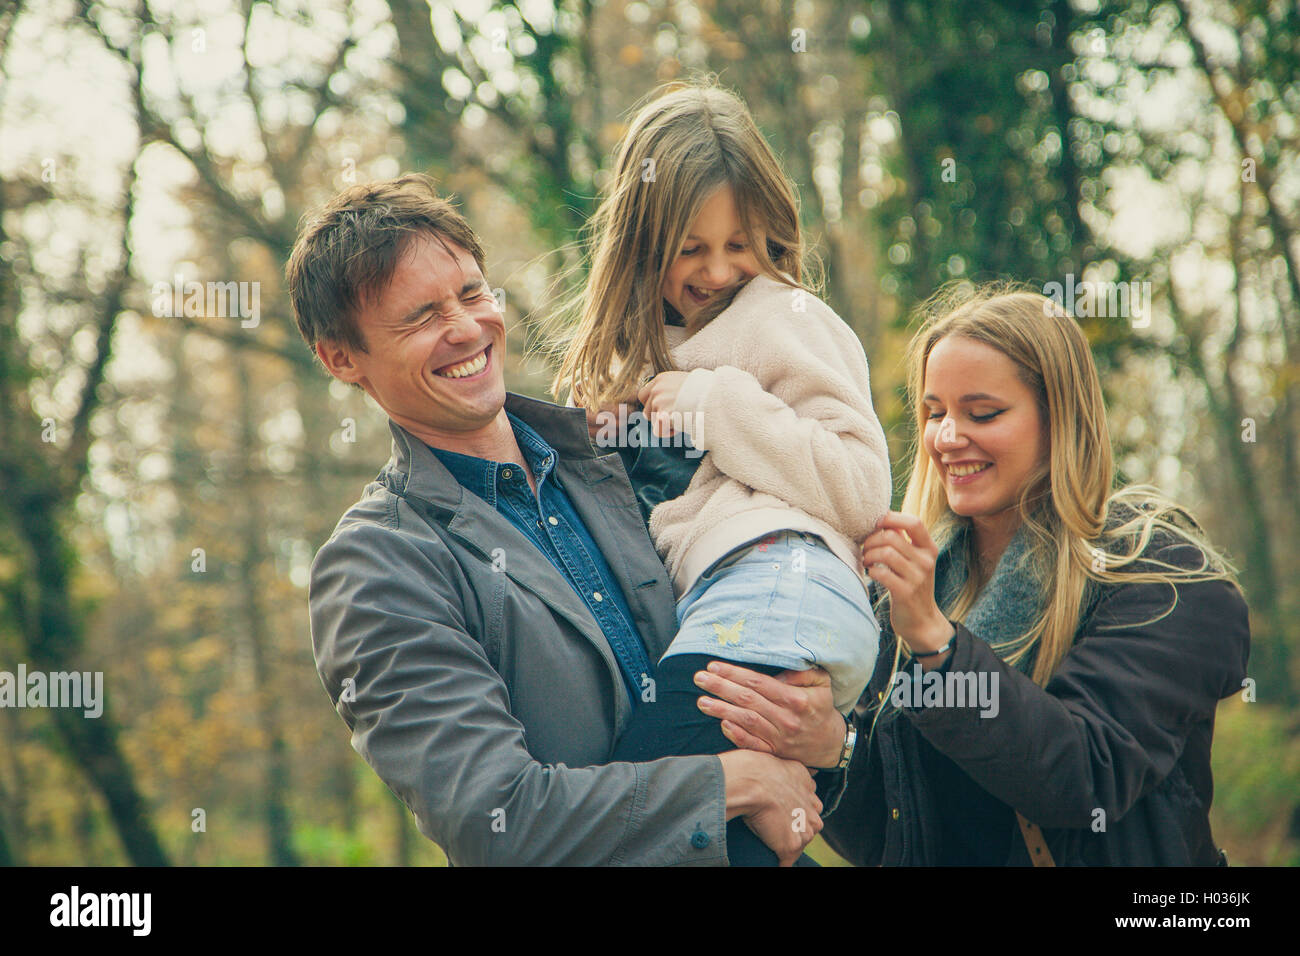 Playful family of three walk in a park on an autumn day. Stock Photo